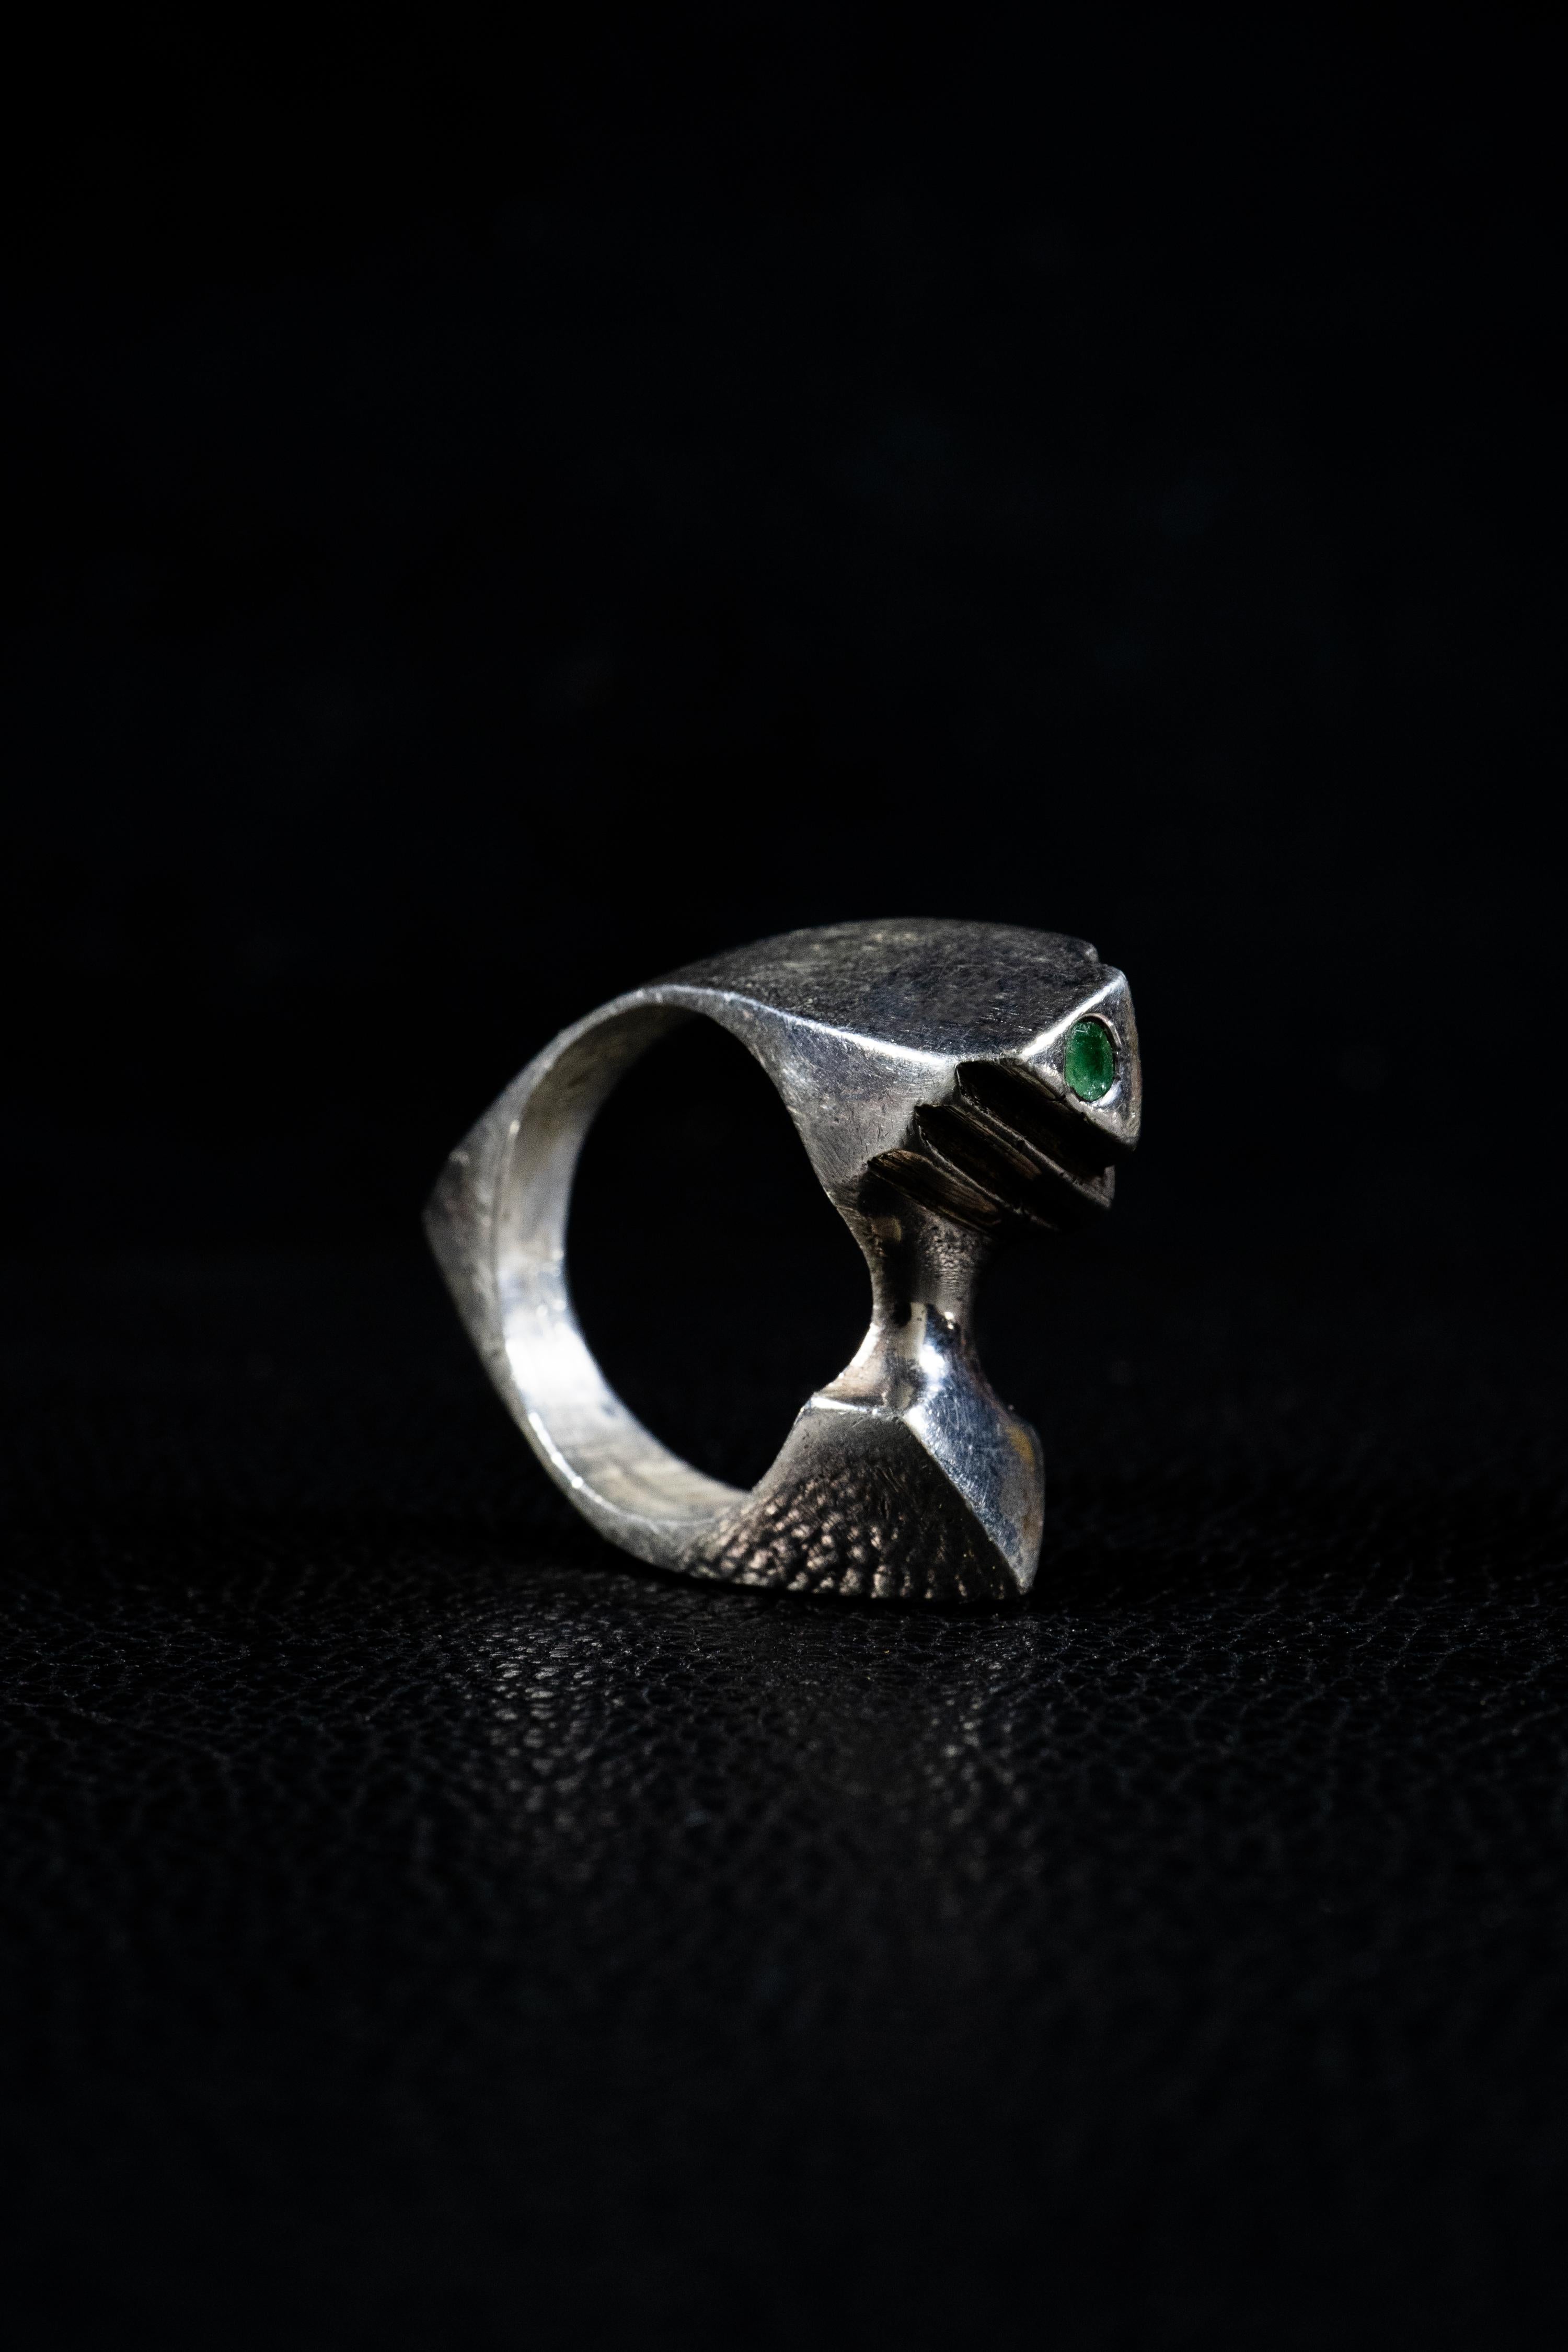 Pyramid is a handcrafted ring by Ken Fury that is hand-carved and cast. The ring showcases the intricate design of a pyramid that interconnects at multiple angles around the ring with a Genuine Emerald stone at the top.

Available in 18K Solid White